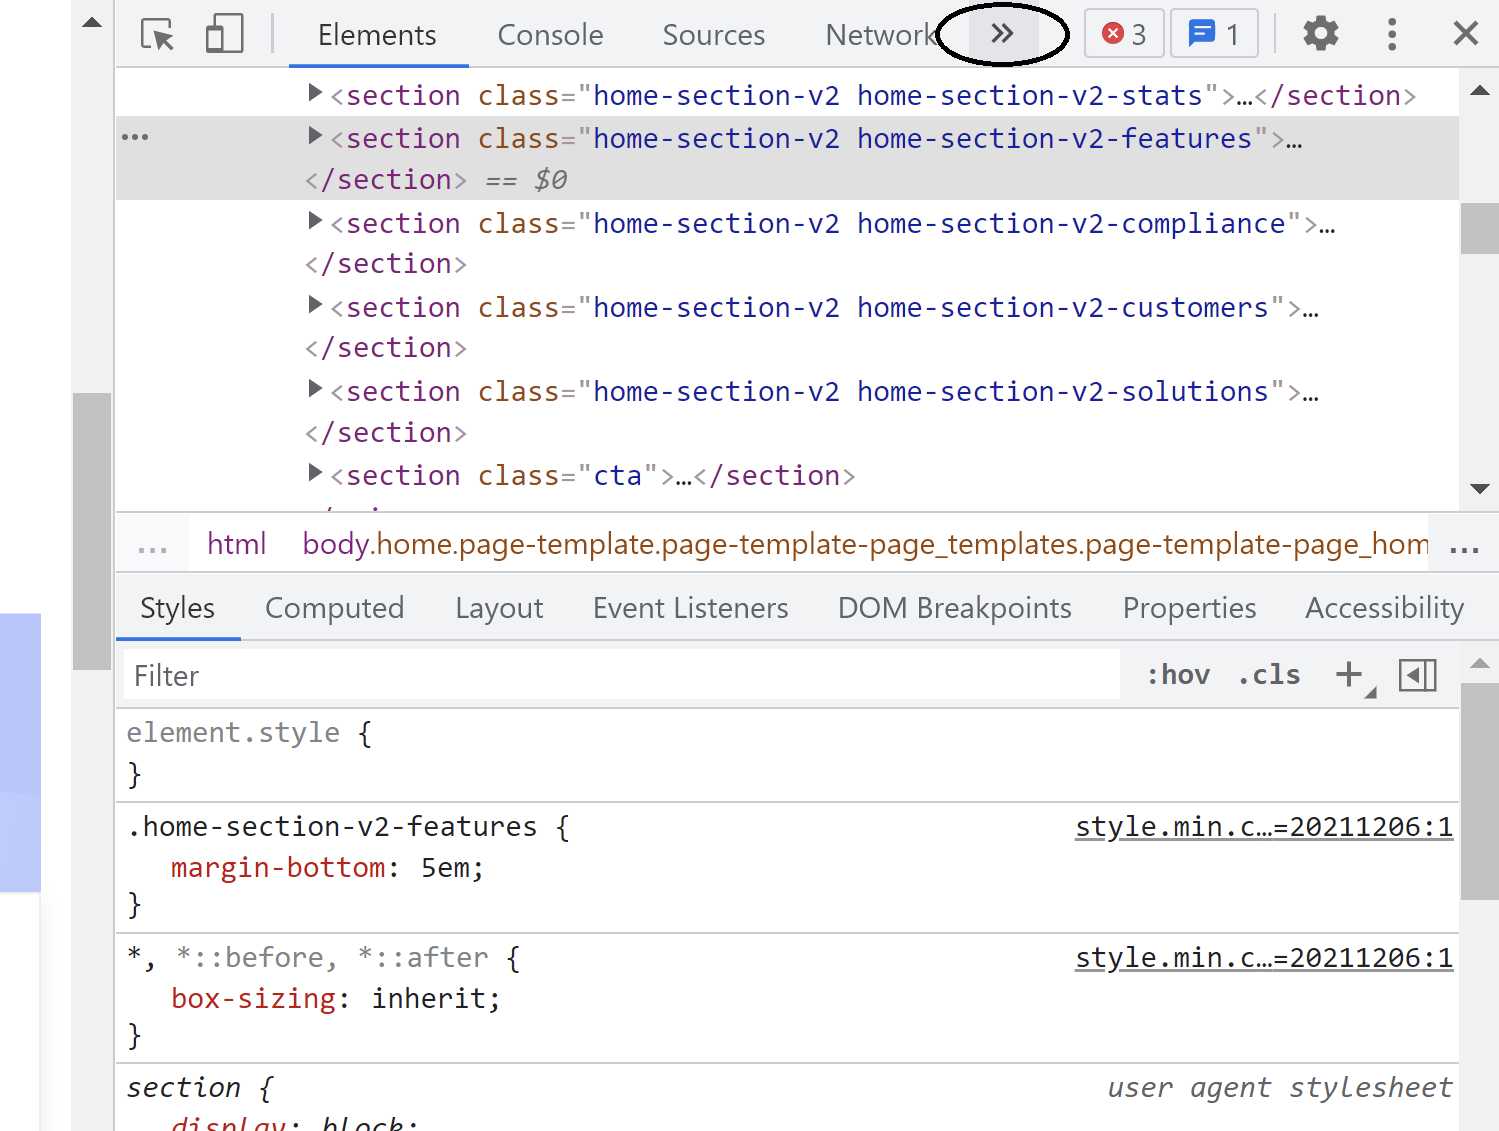 checking cookies in chrome - step 3.1